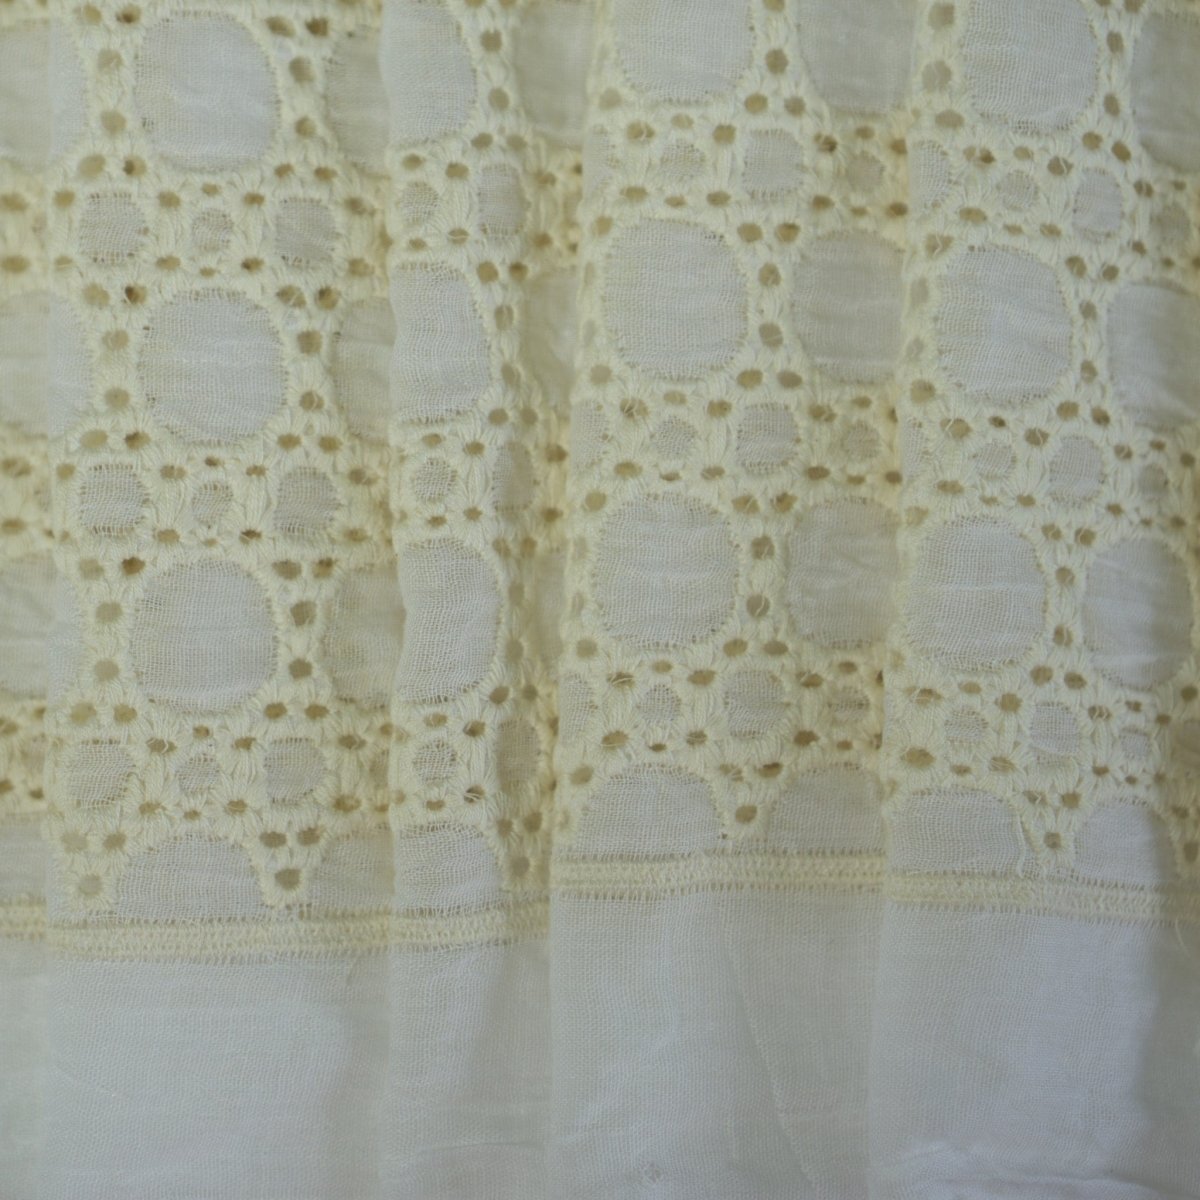 REMNANT - Embroidered Cotton - Cream Circles - 68% Cotton 32% Polyester - 62cm